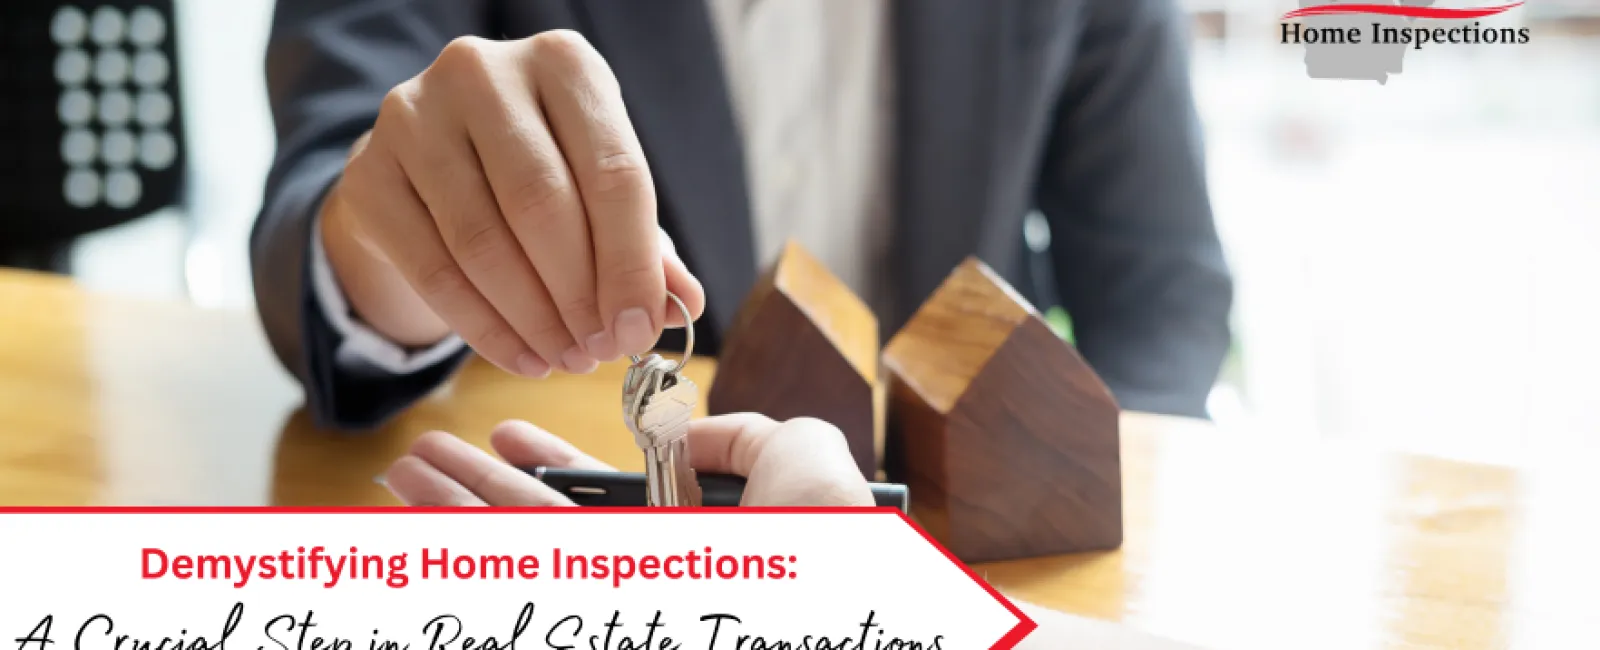 Demystifying Home Inspections: A Crucial Step in Real Estate Transactions